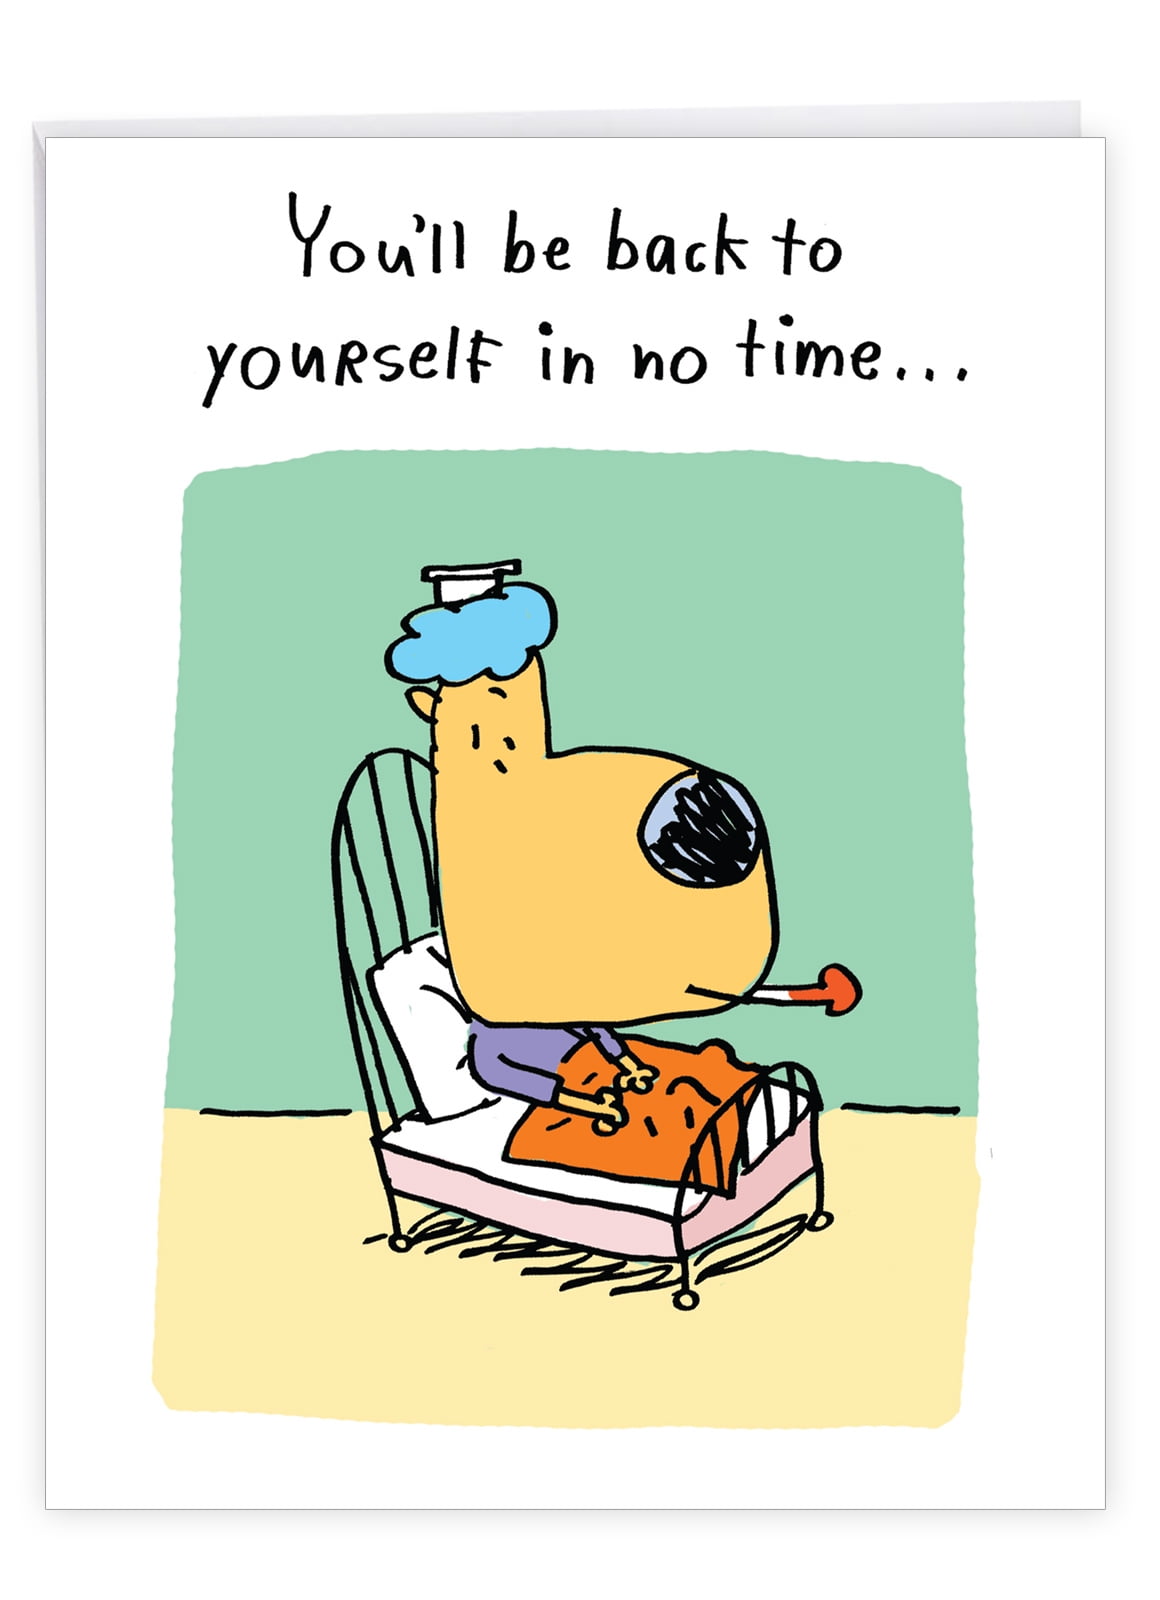 Humorous Get Well Card The Good New Is The Doctor Says You'll Soon Be Back To. 